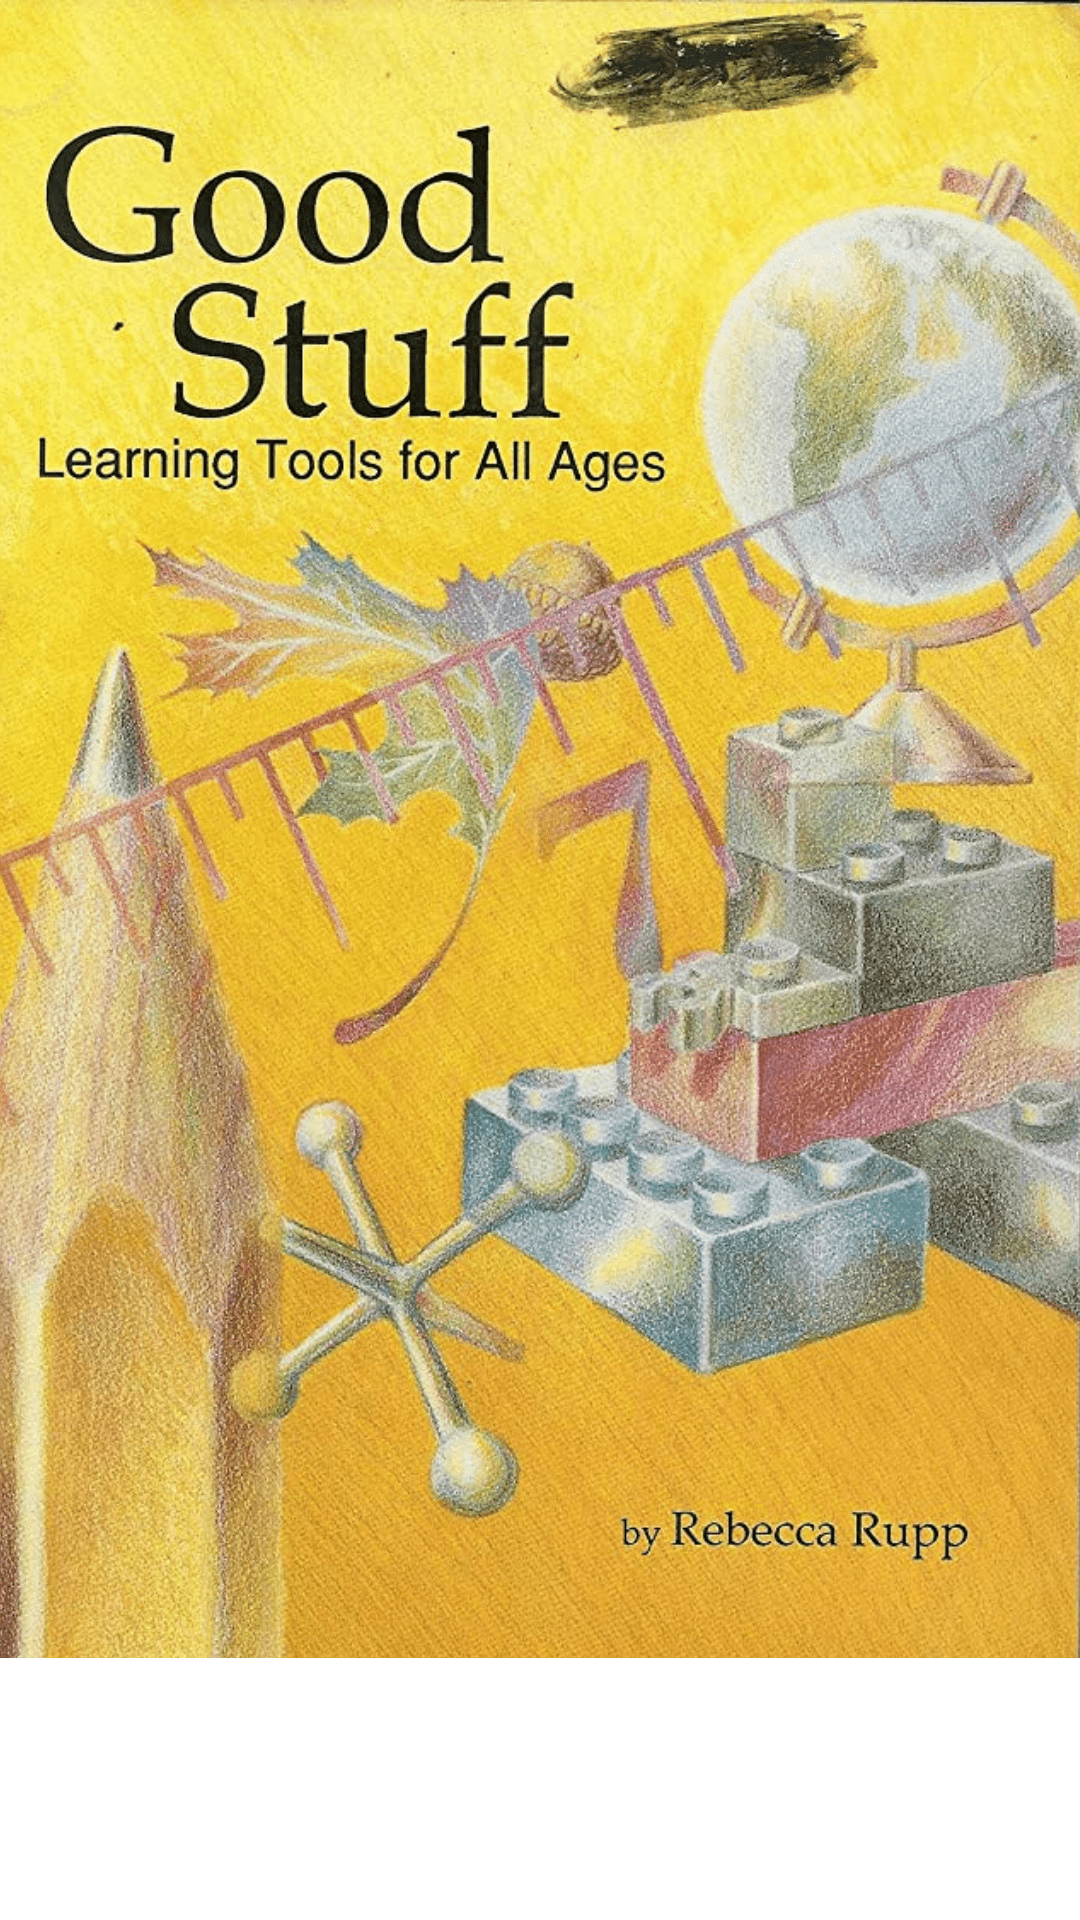 Good Stuff: Learning Tools for All Ages